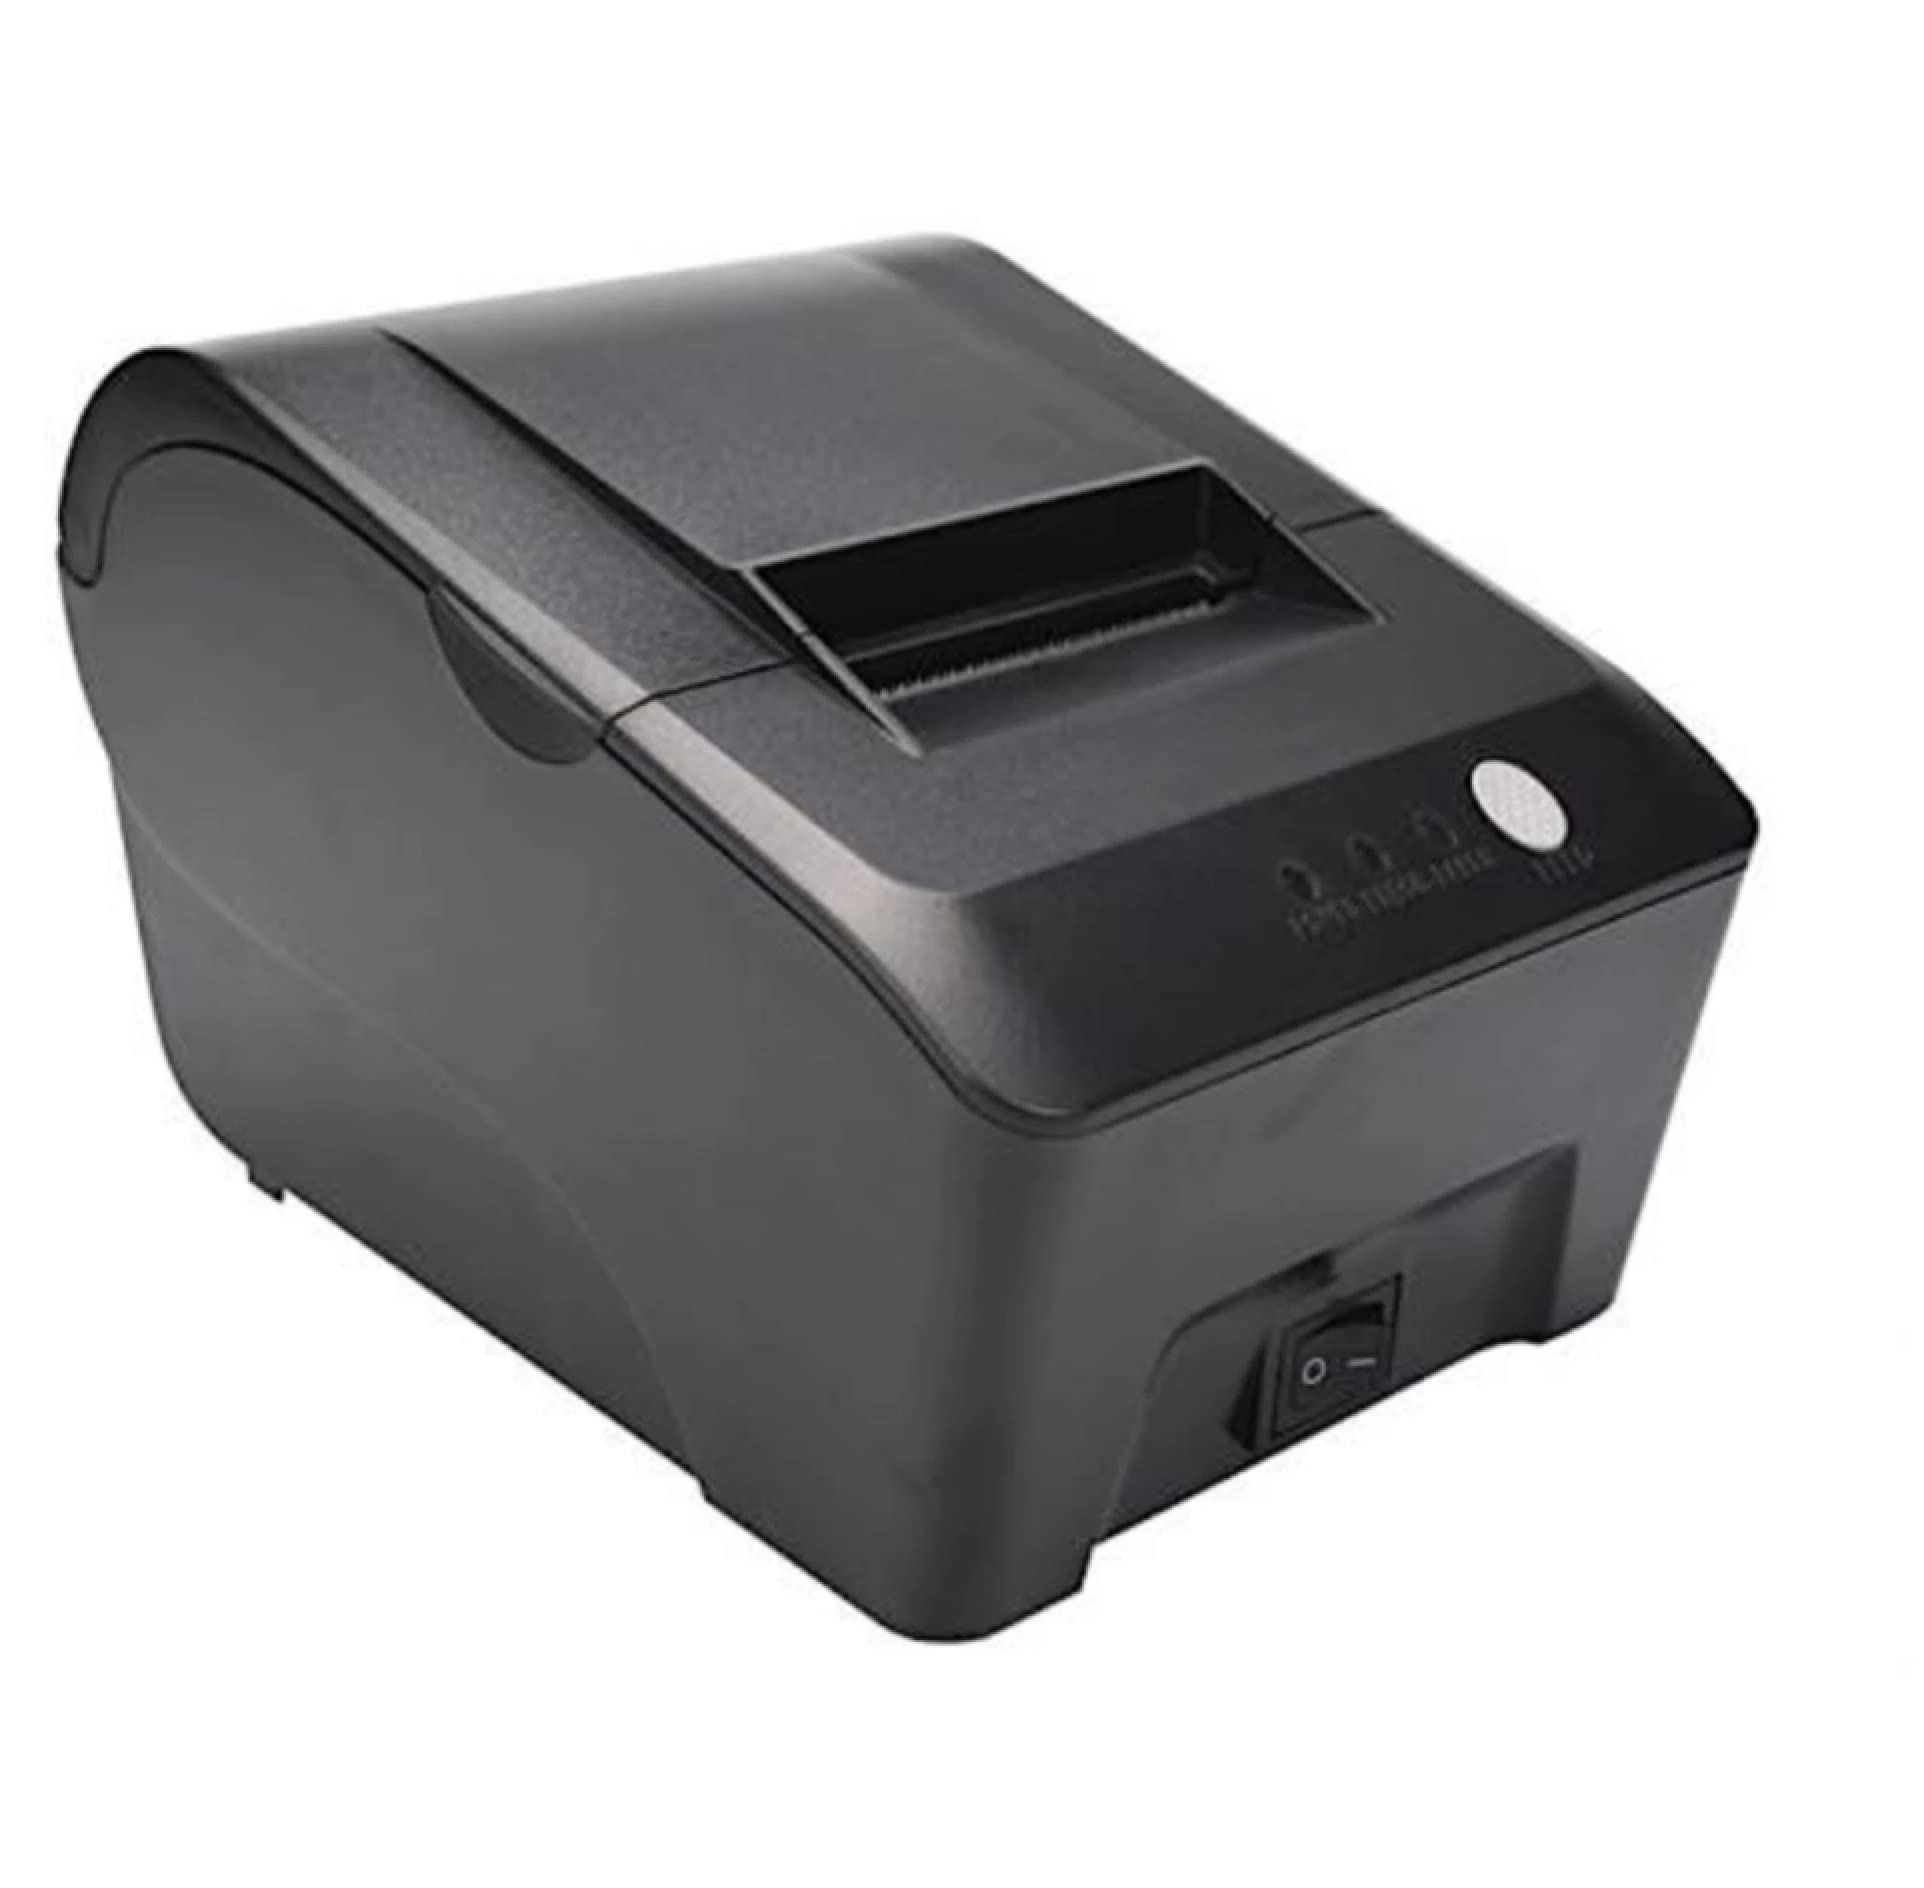 SellEton SL-412-E-L1 Sticker Printer Thermal Desktop for Shipping Labels, Barcodes, Receipts, Tags USB Interface   Serial Port, Inch, with Power S - 4